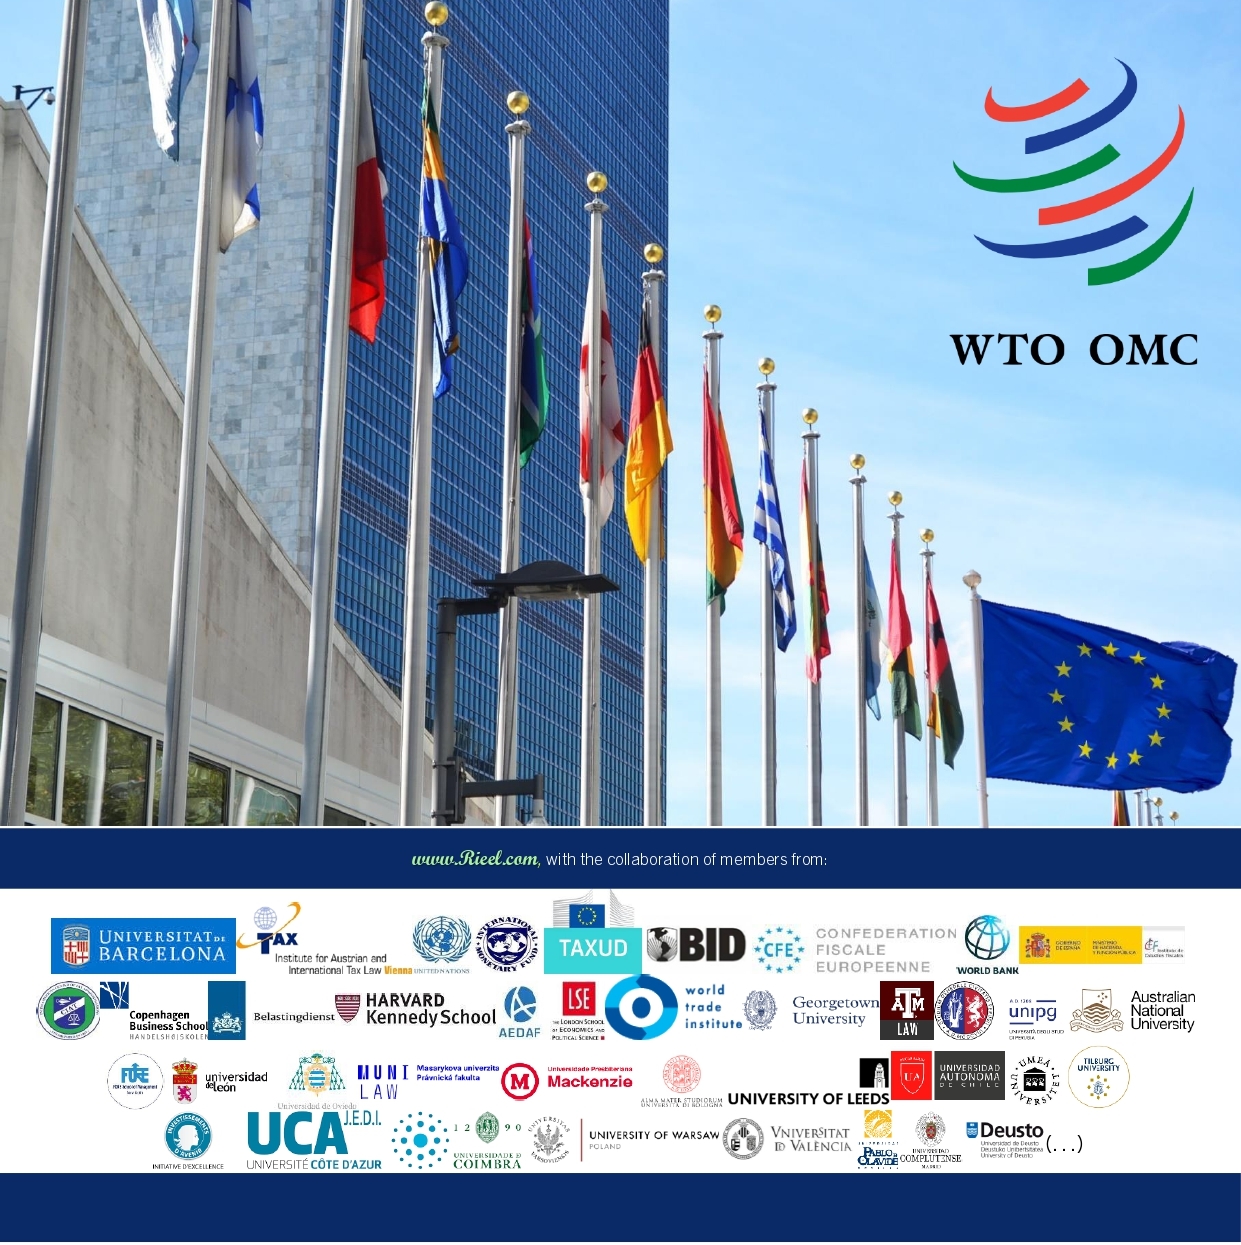 					View Vol. 2 No. 4 (2023): An Effective and Inclusive International Tax Cooperation: Toward A New U.N. International Tax Organization & International Multilateral Agreement on International Tax Cooperation; and a Tax Administrations 3.0, Digitalization of Tax Administrations.
				